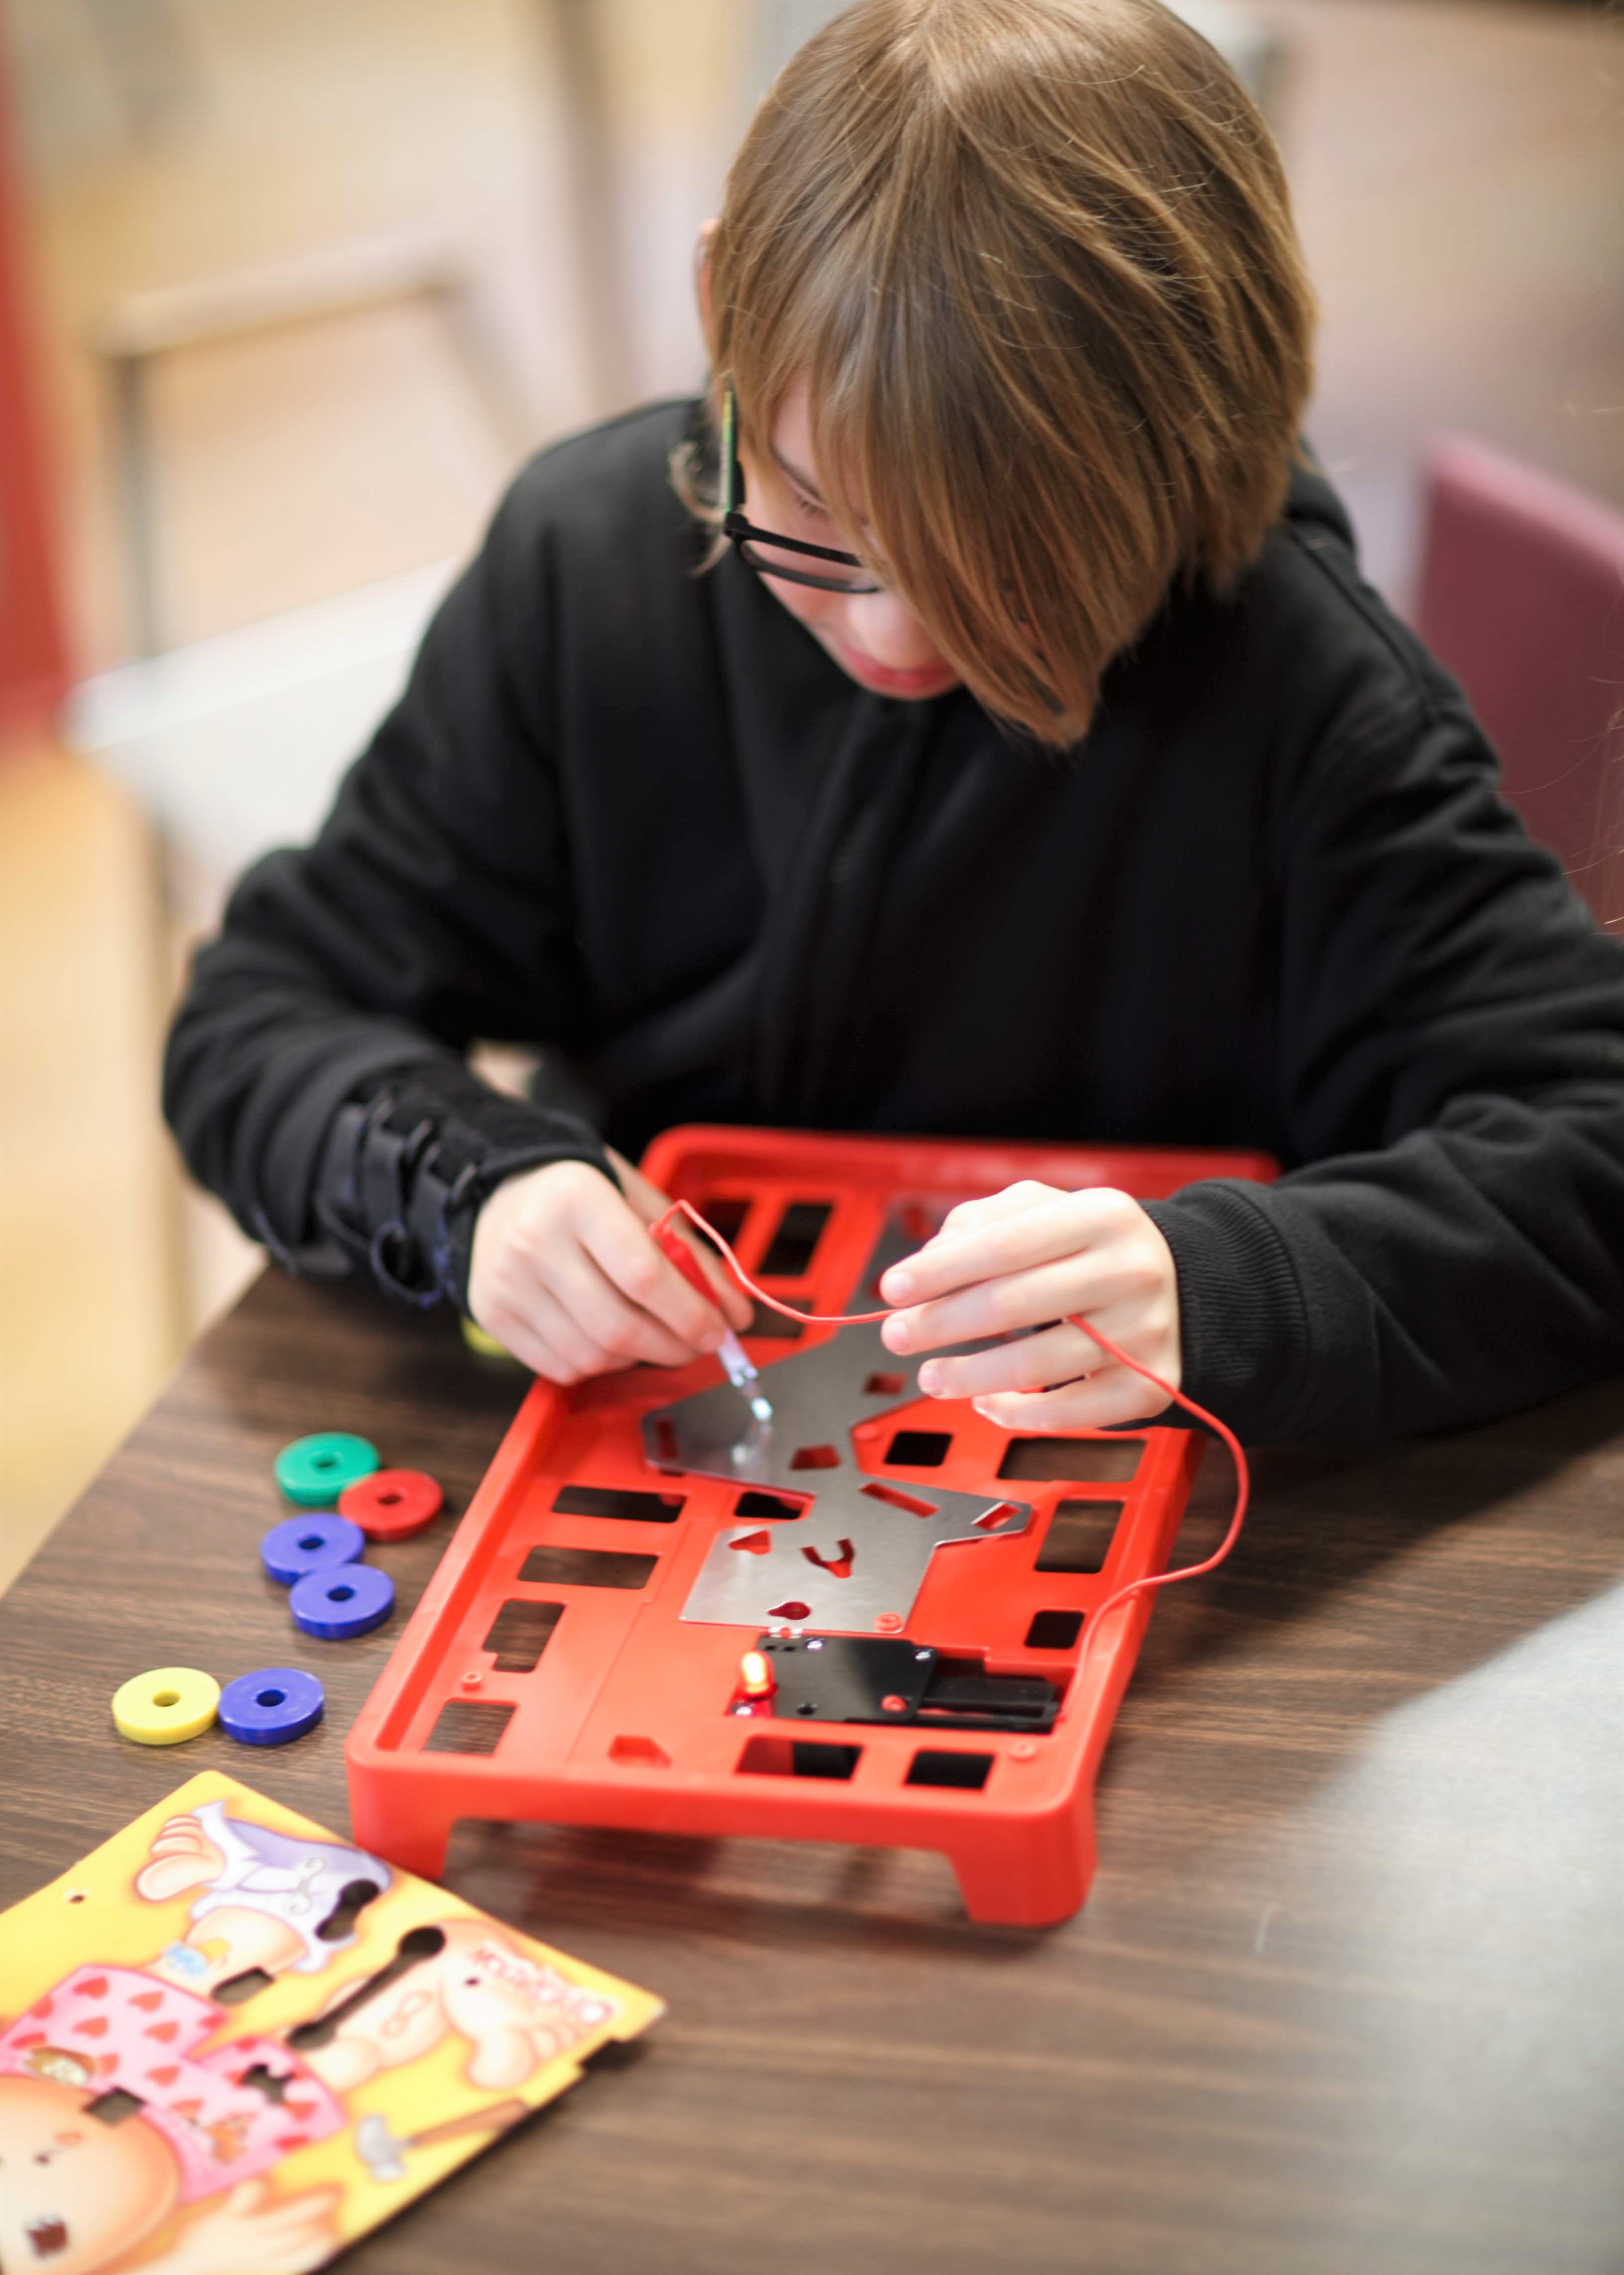 Workshop participant dismantling an operation game to understand how circuits work.